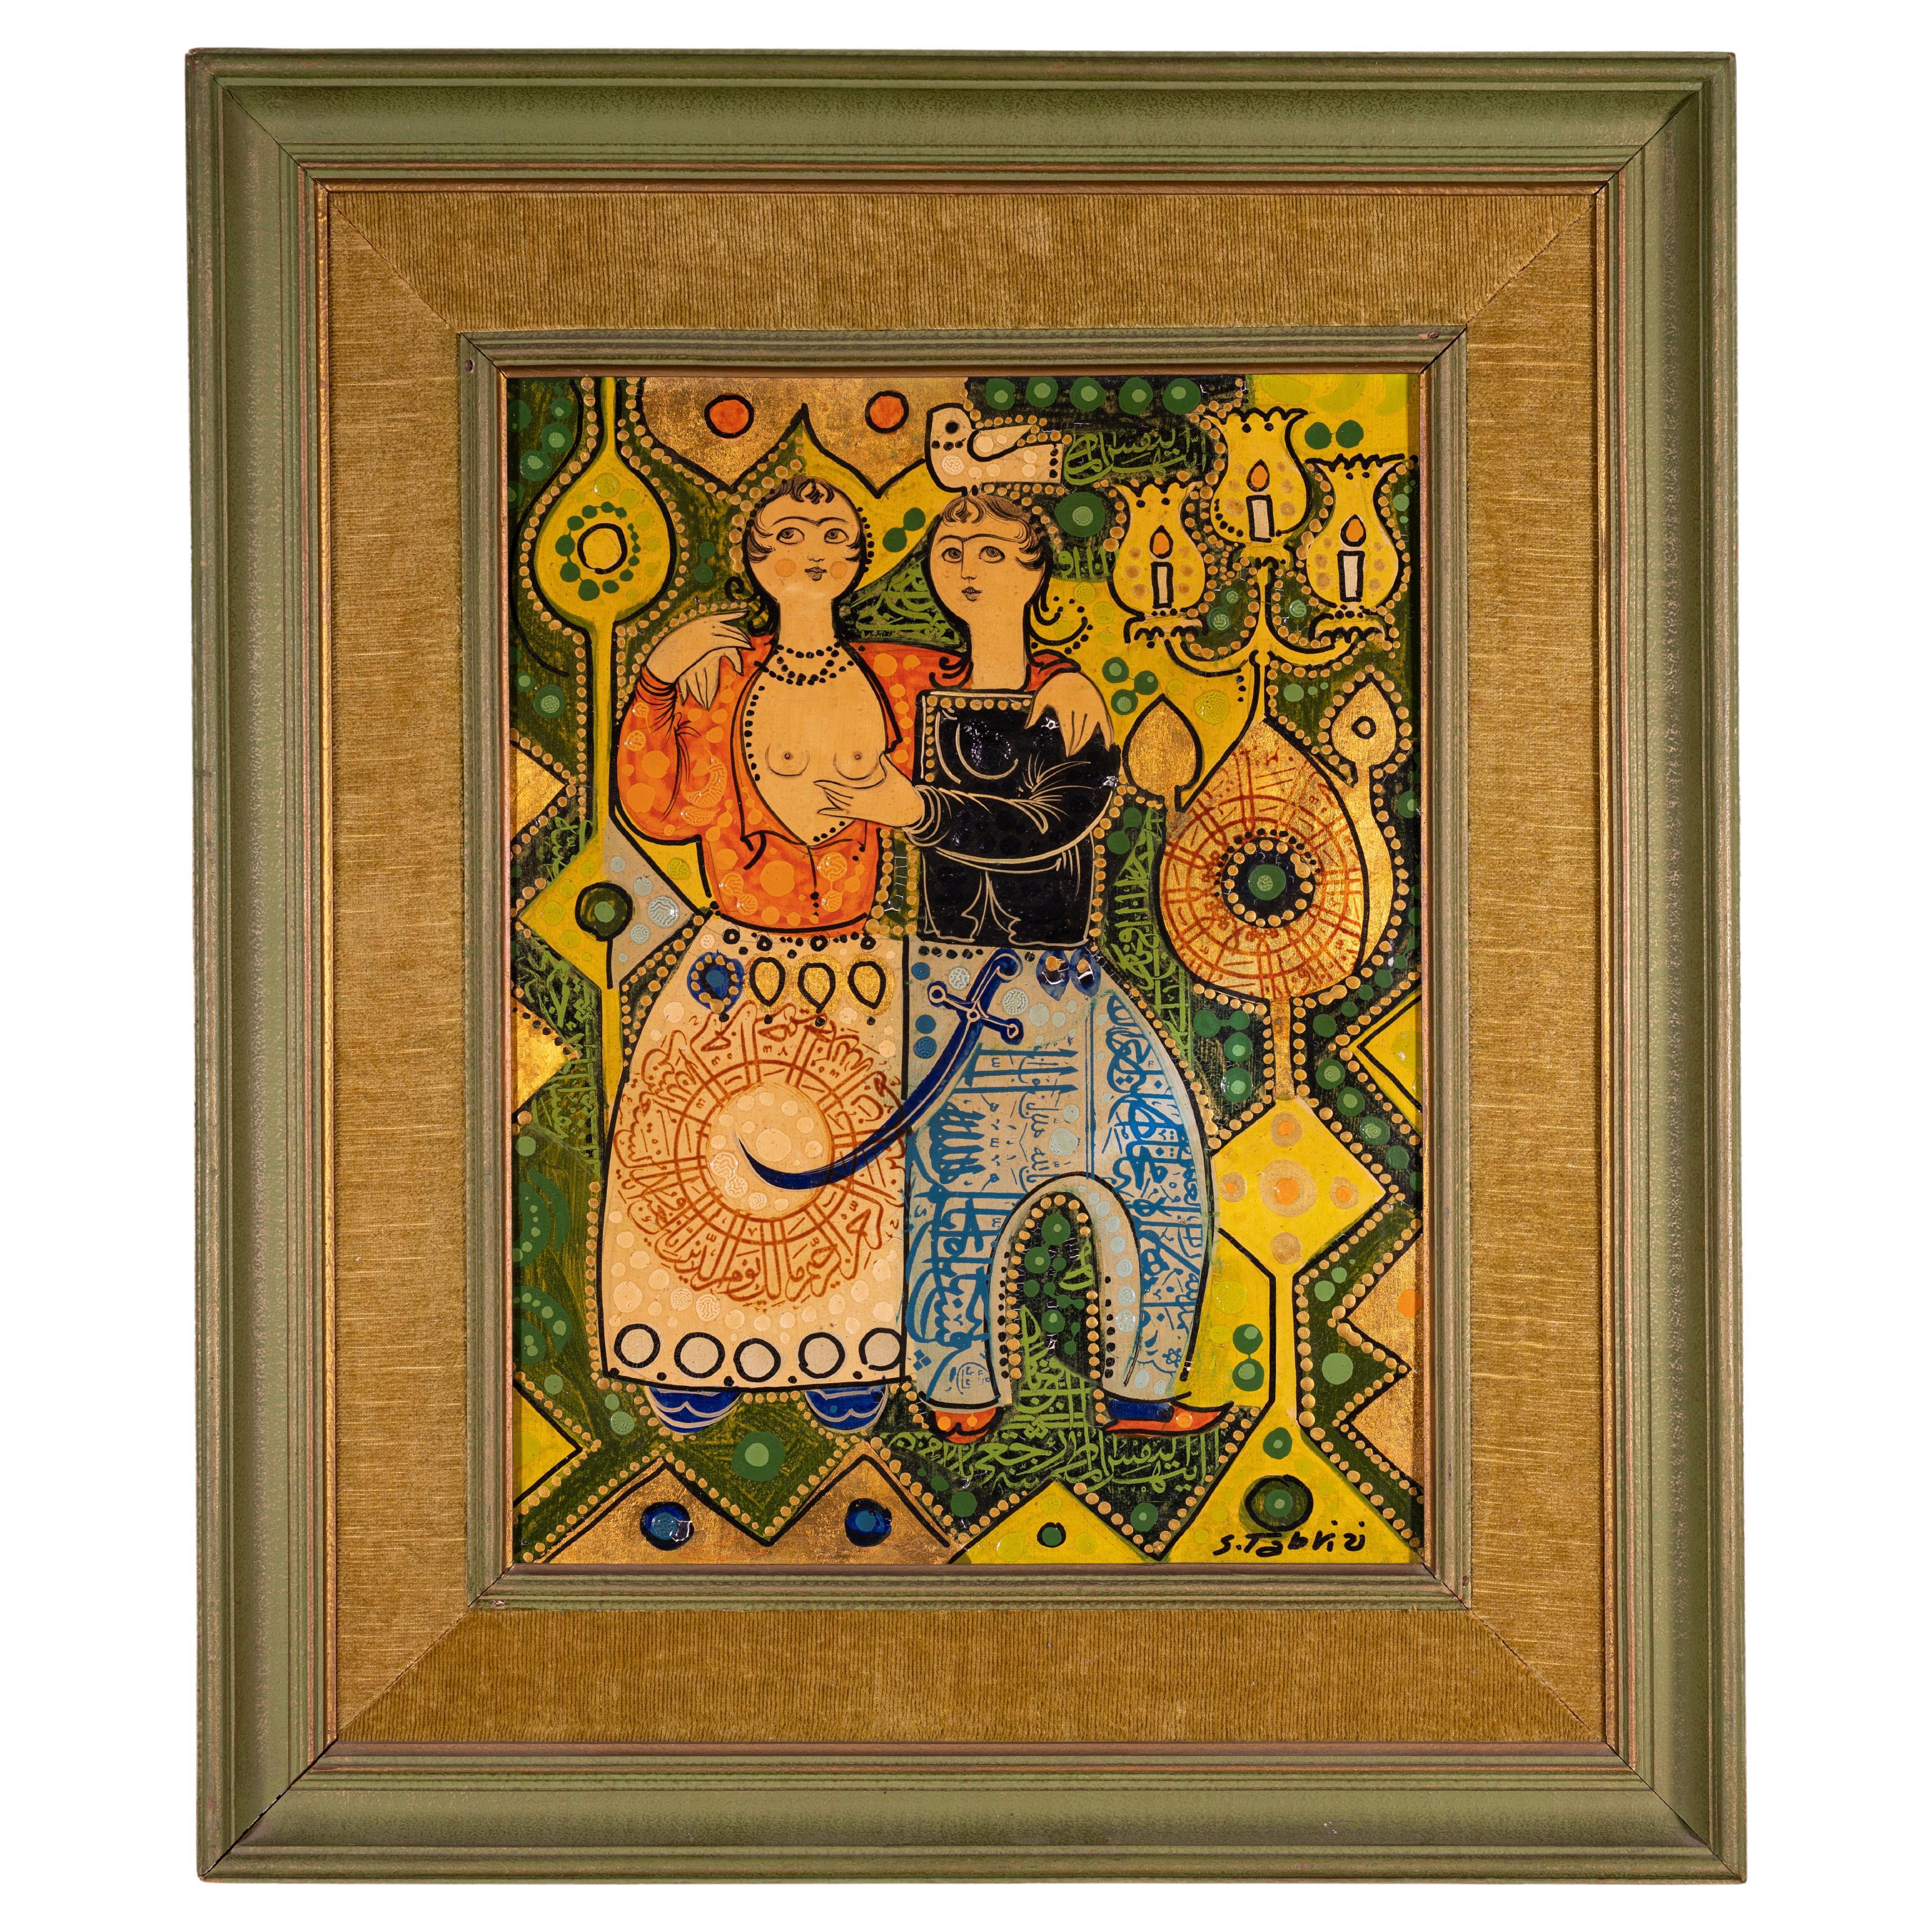 Framed Erotic Persian Painting of Lovers by Sadegh Tabrizi